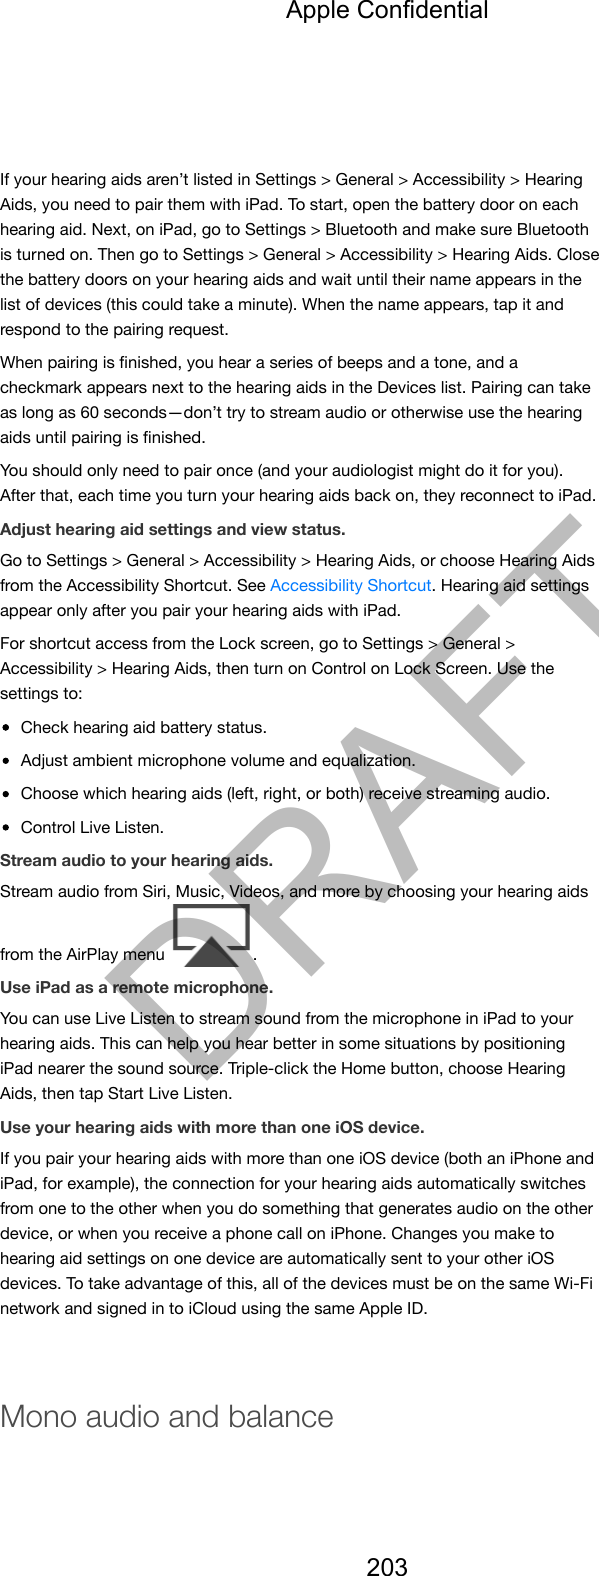 If your hearing aids aren’t listed in Settings &gt; General &gt; Accessibility &gt; HearingAids, you need to pair them with iPad. To start, open the battery door on eachhearing aid. Next, on iPad, go to Settings &gt; Bluetooth and make sure Bluetoothis turned on. Then go to Settings &gt; General &gt; Accessibility &gt; Hearing Aids. Closethe battery doors on your hearing aids and wait until their name appears in thelist of devices (this could take a minute). When the name appears, tap it andrespond to the pairing request.When pairing is ﬁnished, you hear a series of beeps and a tone, and acheckmark appears next to the hearing aids in the Devices list. Pairing can takeas long as 60 seconds—don’t try to stream audio or otherwise use the hearingaids until pairing is ﬁnished.You should only need to pair once (and your audiologist might do it for you).After that, each time you turn your hearing aids back on, they reconnect to iPad.Adjust hearing aid settings and view status.Go to Settings &gt; General &gt; Accessibility &gt; Hearing Aids, or choose Hearing Aidsfrom the Accessibility Shortcut. See Accessibility Shortcut. Hearing aid settingsappear only after you pair your hearing aids with iPad.For shortcut access from the Lock screen, go to Settings &gt; General &gt;Accessibility &gt; Hearing Aids, then turn on Control on Lock Screen. Use thesettings to:Check hearing aid battery status.Adjust ambient microphone volume and equalization.Choose which hearing aids (left, right, or both) receive streaming audio.Control Live Listen.Stream audio to your hearing aids.Stream audio from Siri, Music, Videos, and more by choosing your hearing aidsfrom the AirPlay menu  .Use iPad as a remote microphone.You can use Live Listen to stream sound from the microphone in iPad to yourhearing aids. This can help you hear better in some situations by positioningiPad nearer the sound source. Triple-click the Home button, choose HearingAids, then tap Start Live Listen.Use your hearing aids with more than one iOS device.If you pair your hearing aids with more than one iOS device (both an iPhone andiPad, for example), the connection for your hearing aids automatically switchesfrom one to the other when you do something that generates audio on the otherdevice, or when you receive a phone call on iPhone. Changes you make tohearing aid settings on one device are automatically sent to your other iOSdevices. To take advantage of this, all of the devices must be on the same Wi-Finetwork and signed in to iCloud using the same Apple ID.Mono audio and balanceApple Confidential203DRAFT